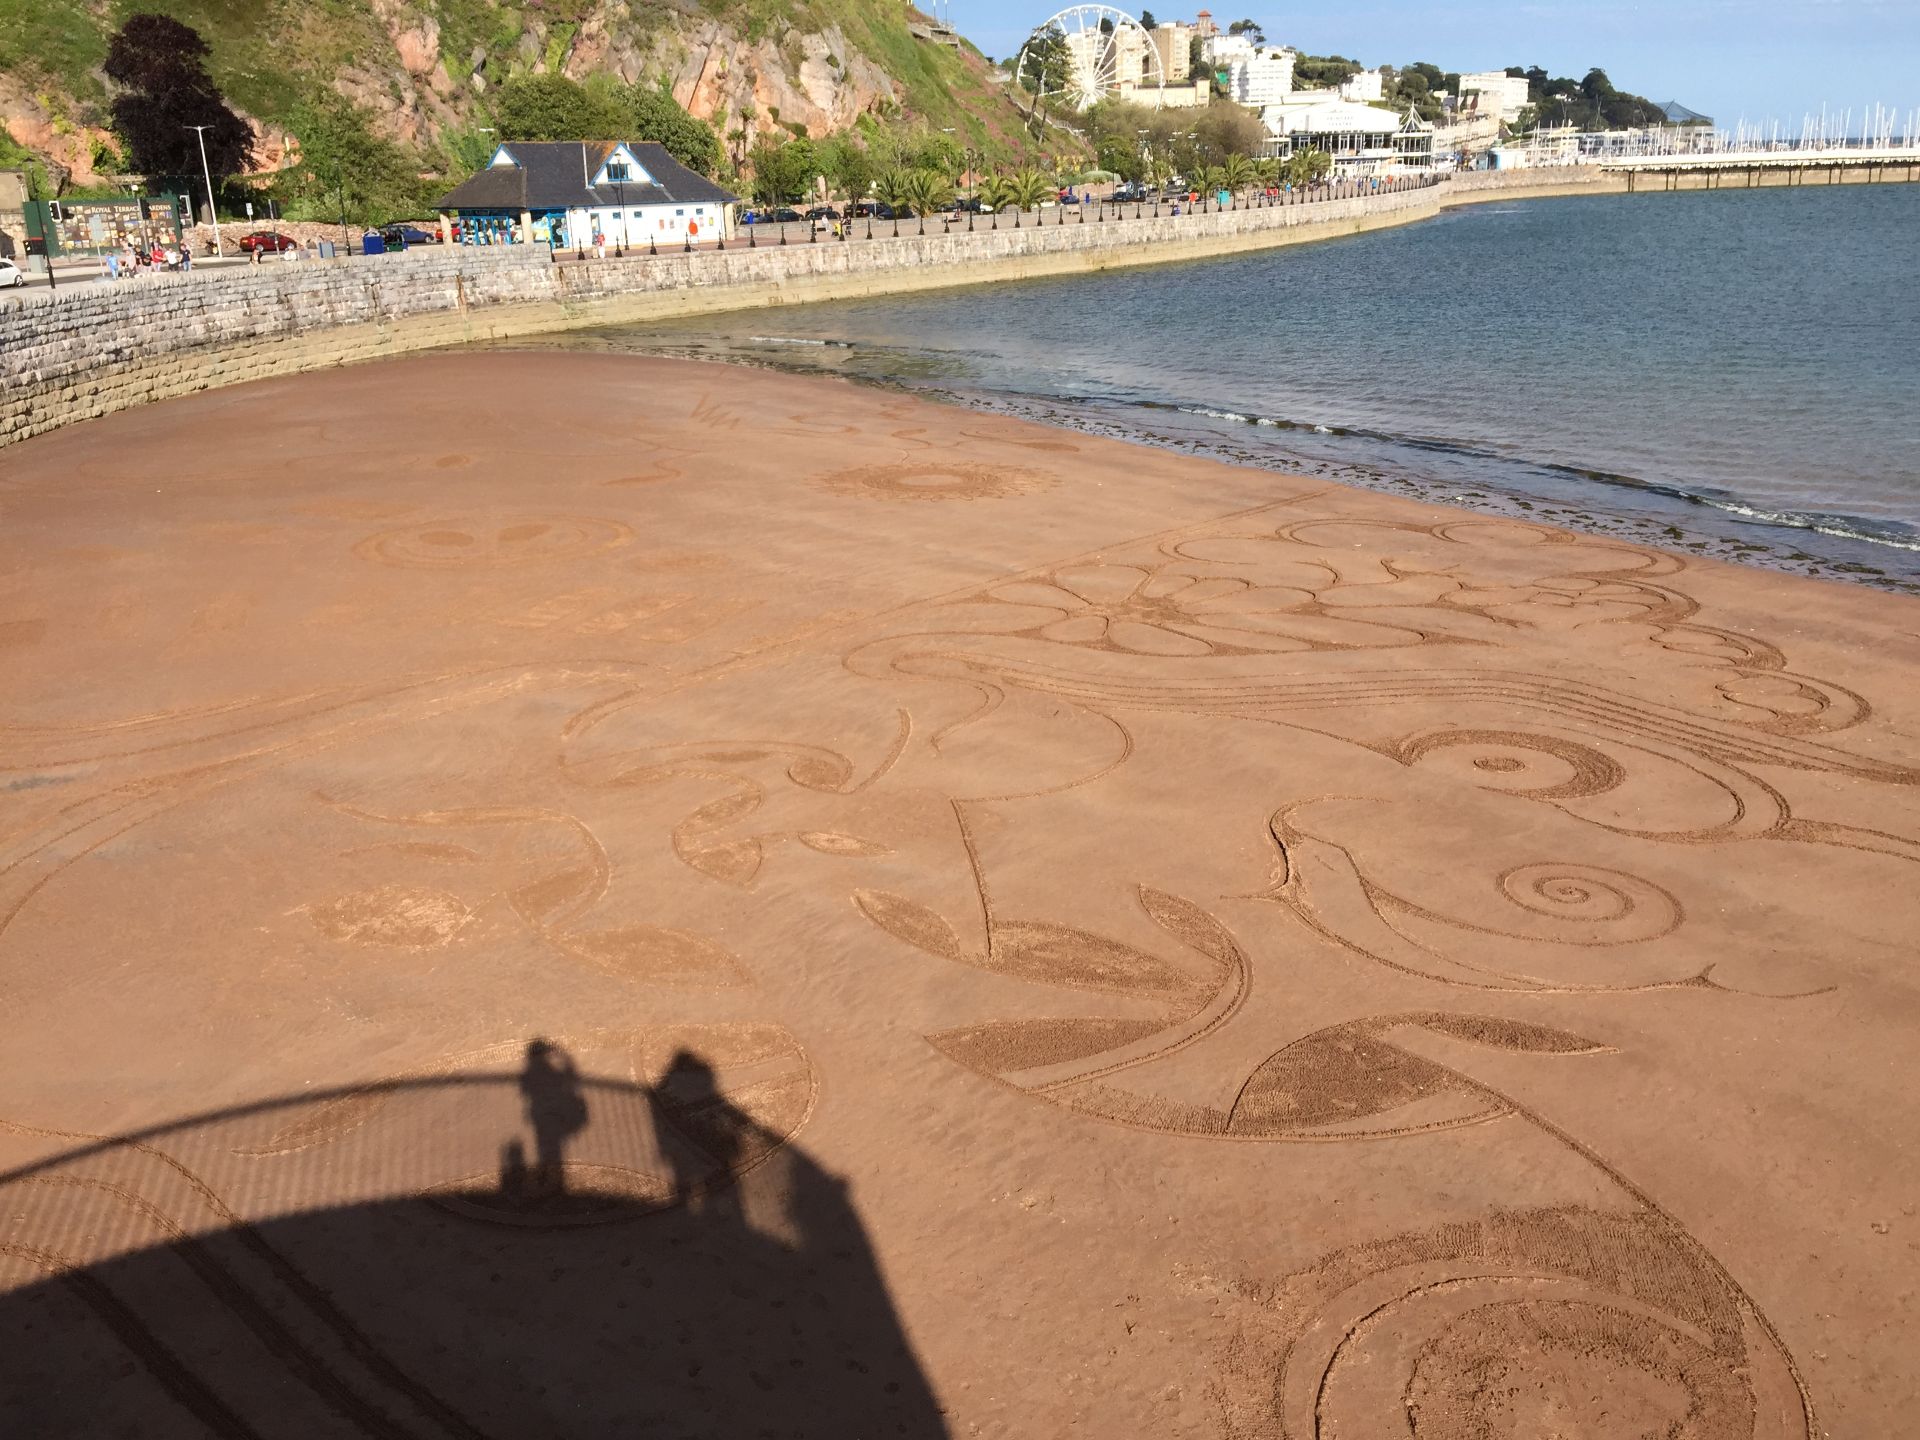 Child Friendly Self Catering in Devon and Cornwall